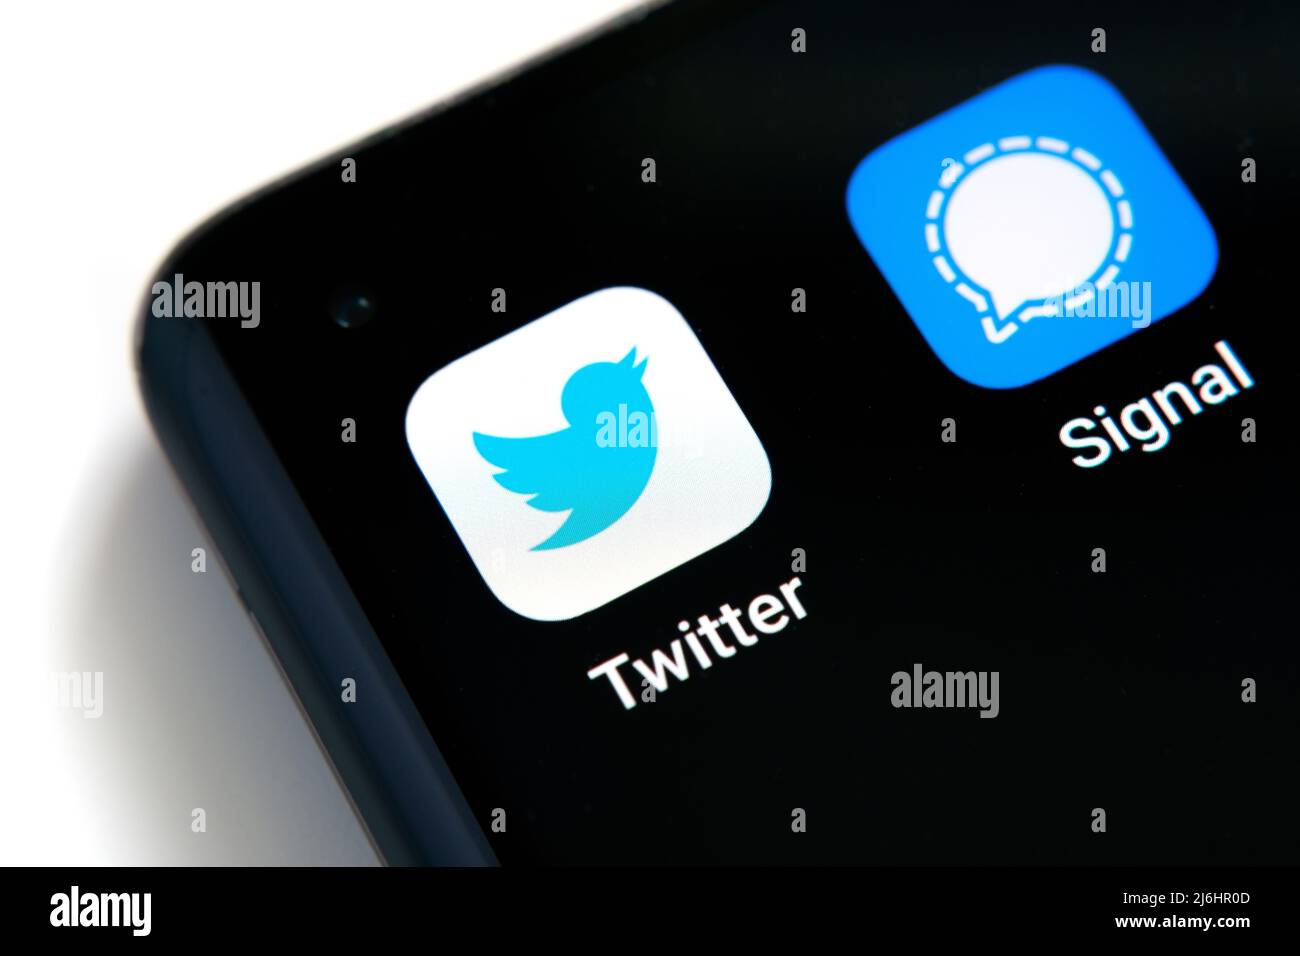 The smartphone corner with Twitter and Signal apps macro photo. Twitter plan to use the encryption as in messaging Signal app. Stafford, United Kingdo Stock Photo